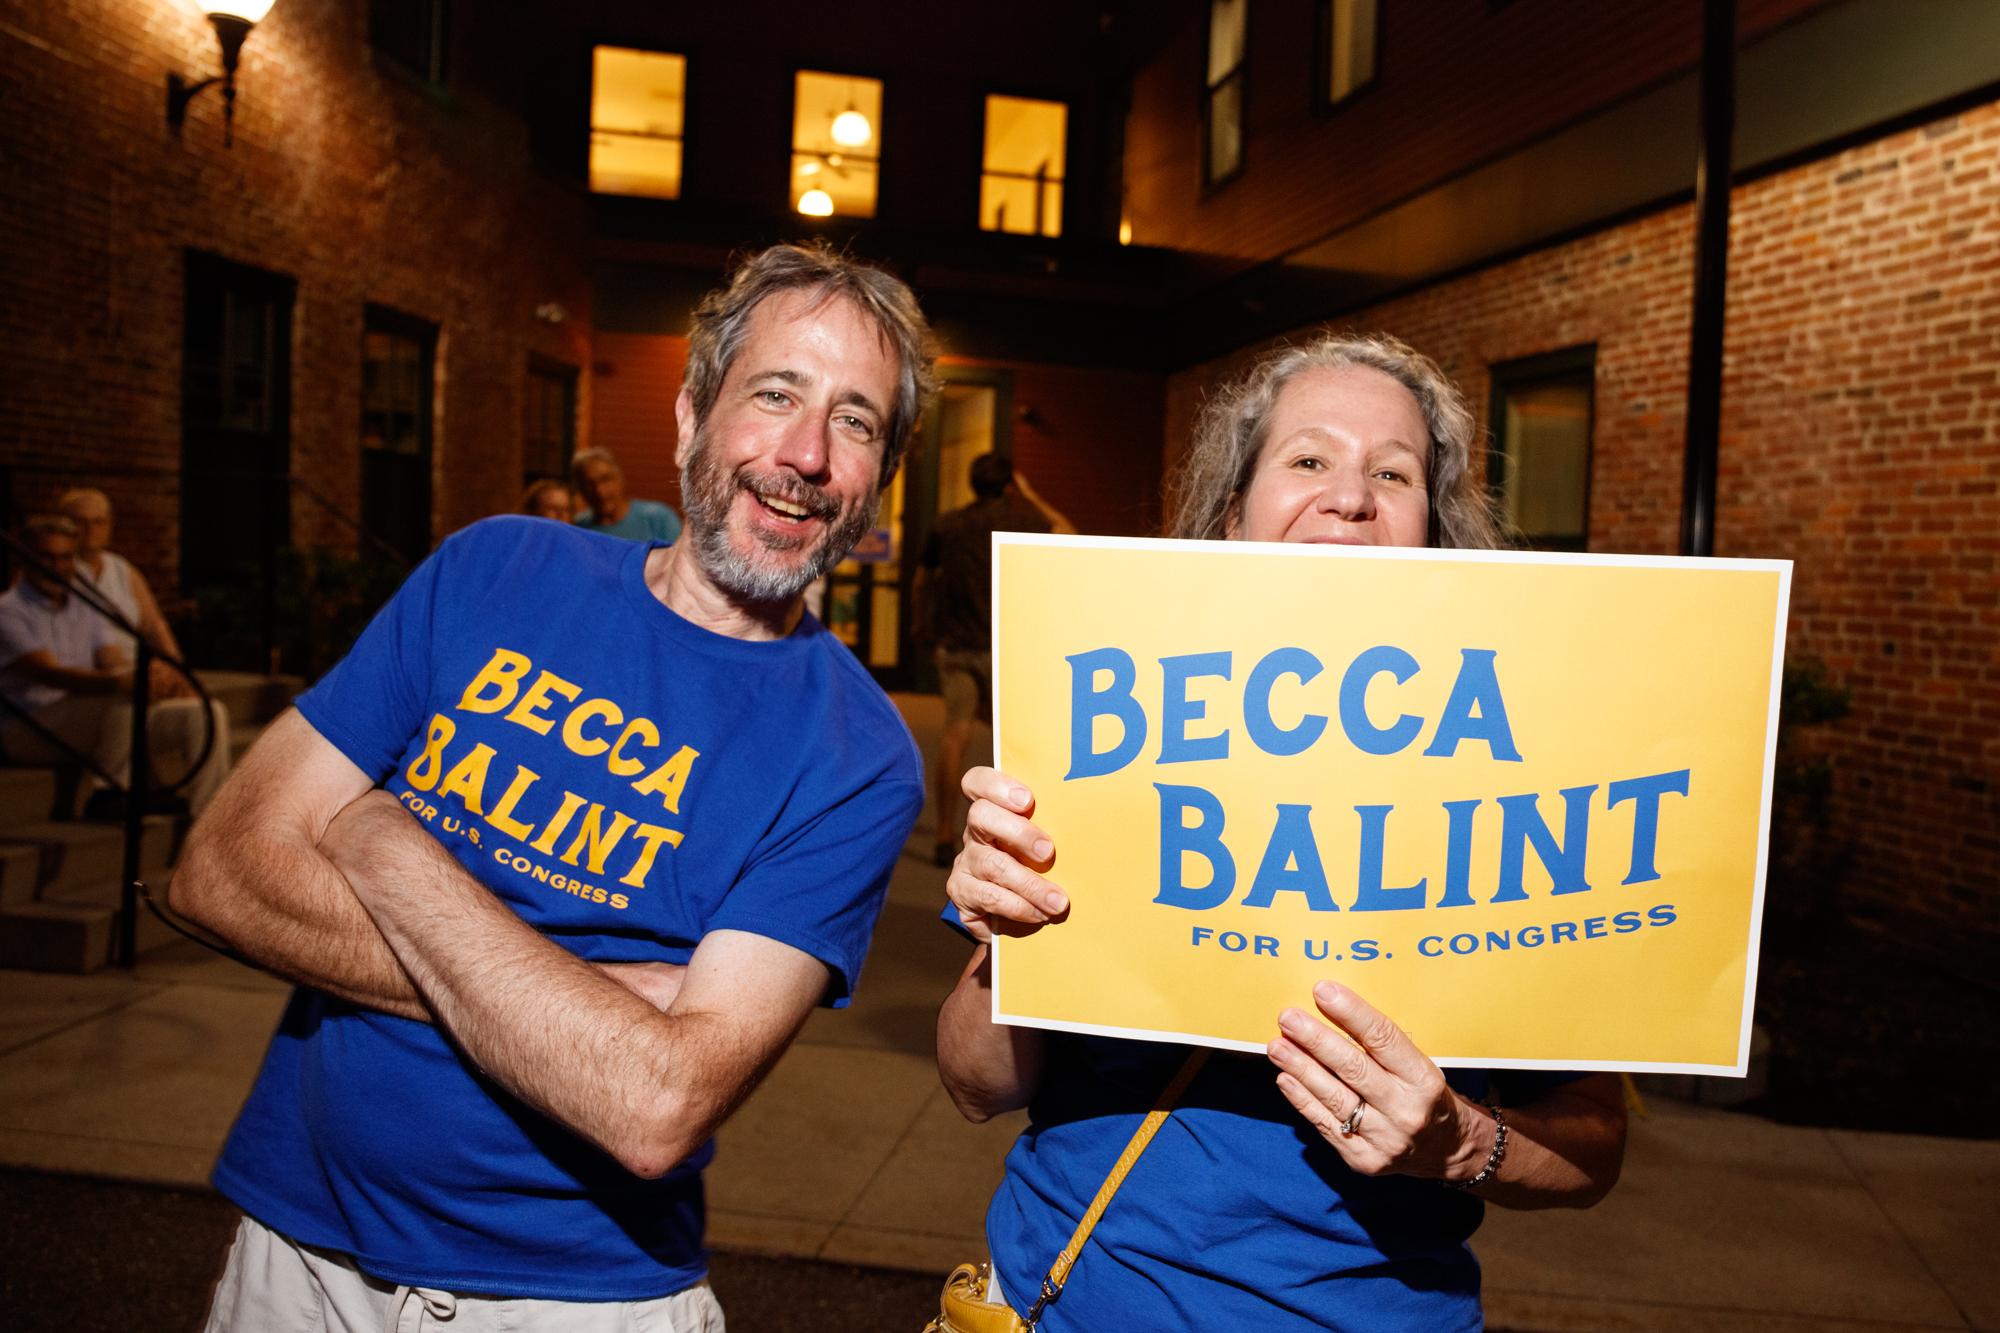 Becca Balint wins Vermont's Democratic US House nomination - Beth and Scott Esmond of Jericho, Vt., stand in support...